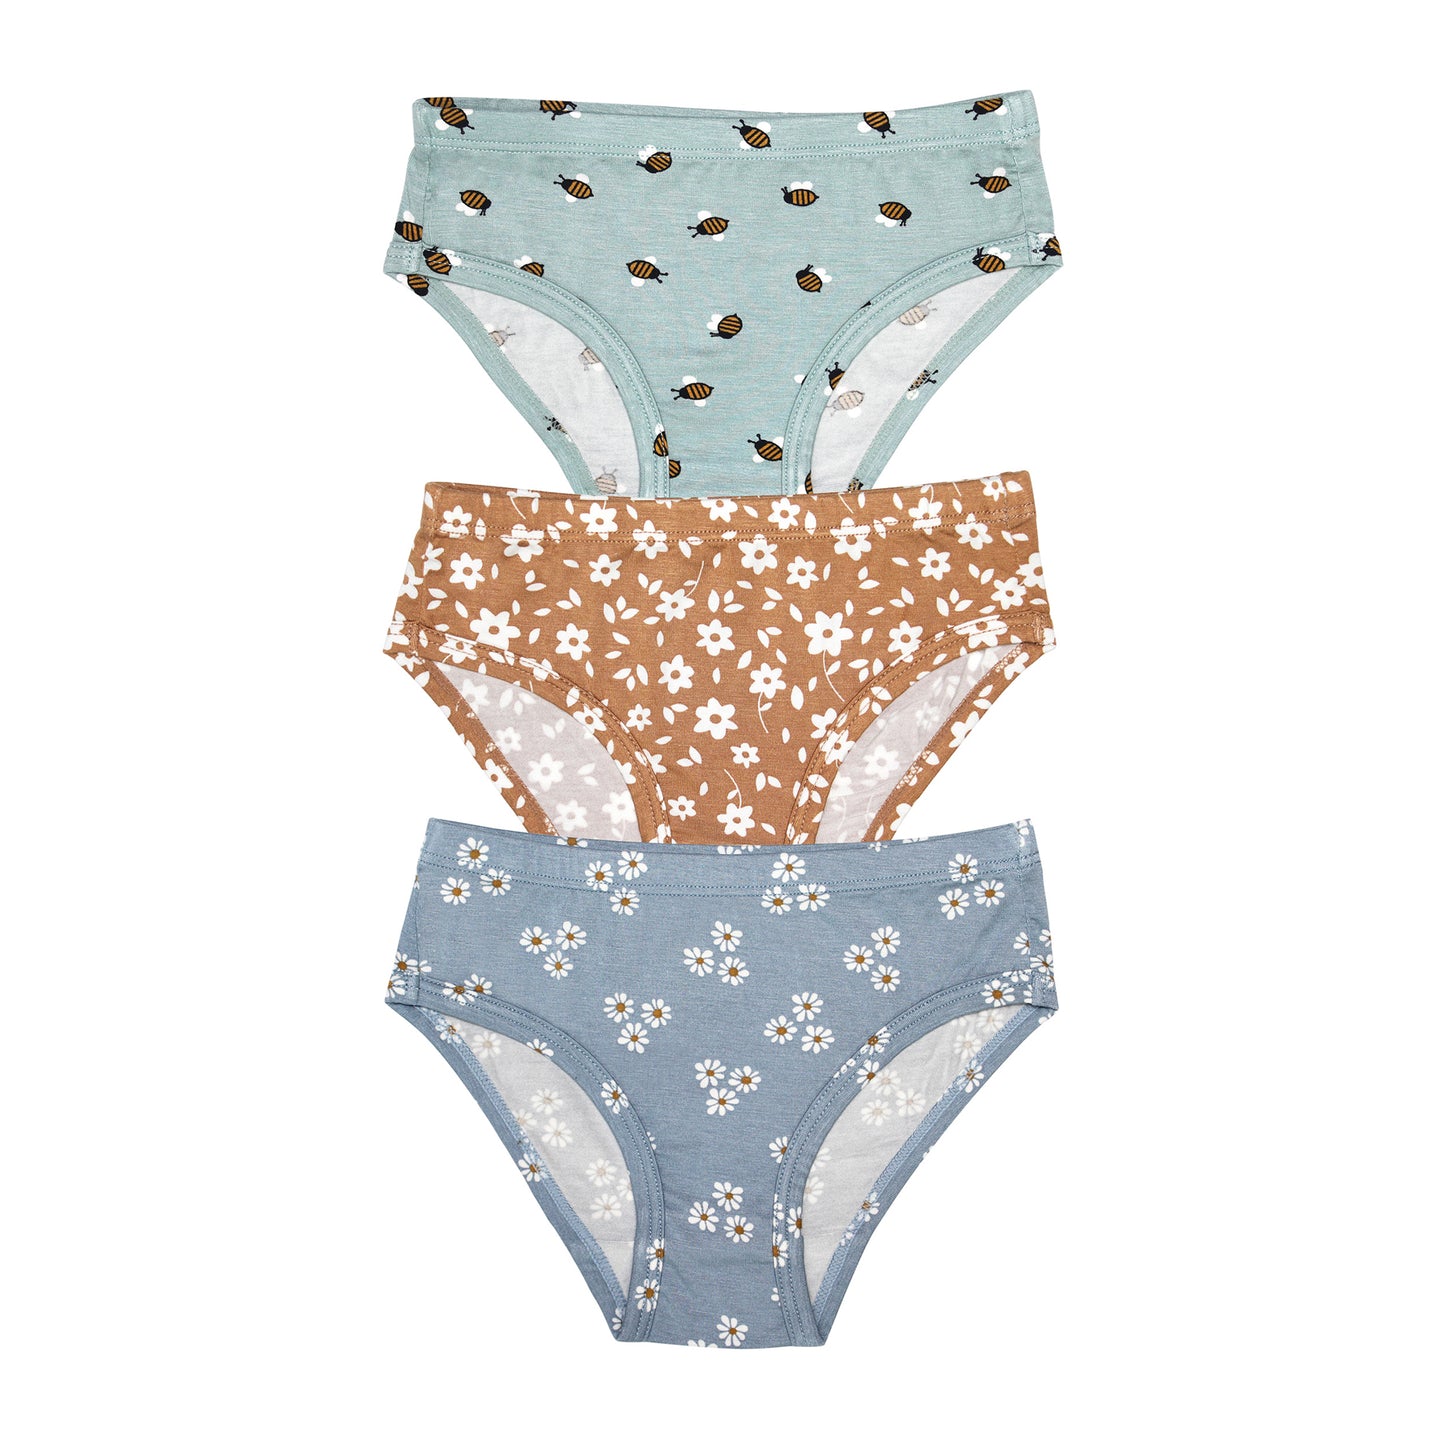 Camel Floral, Blue Daisies & Bees Underwear 3 Pack